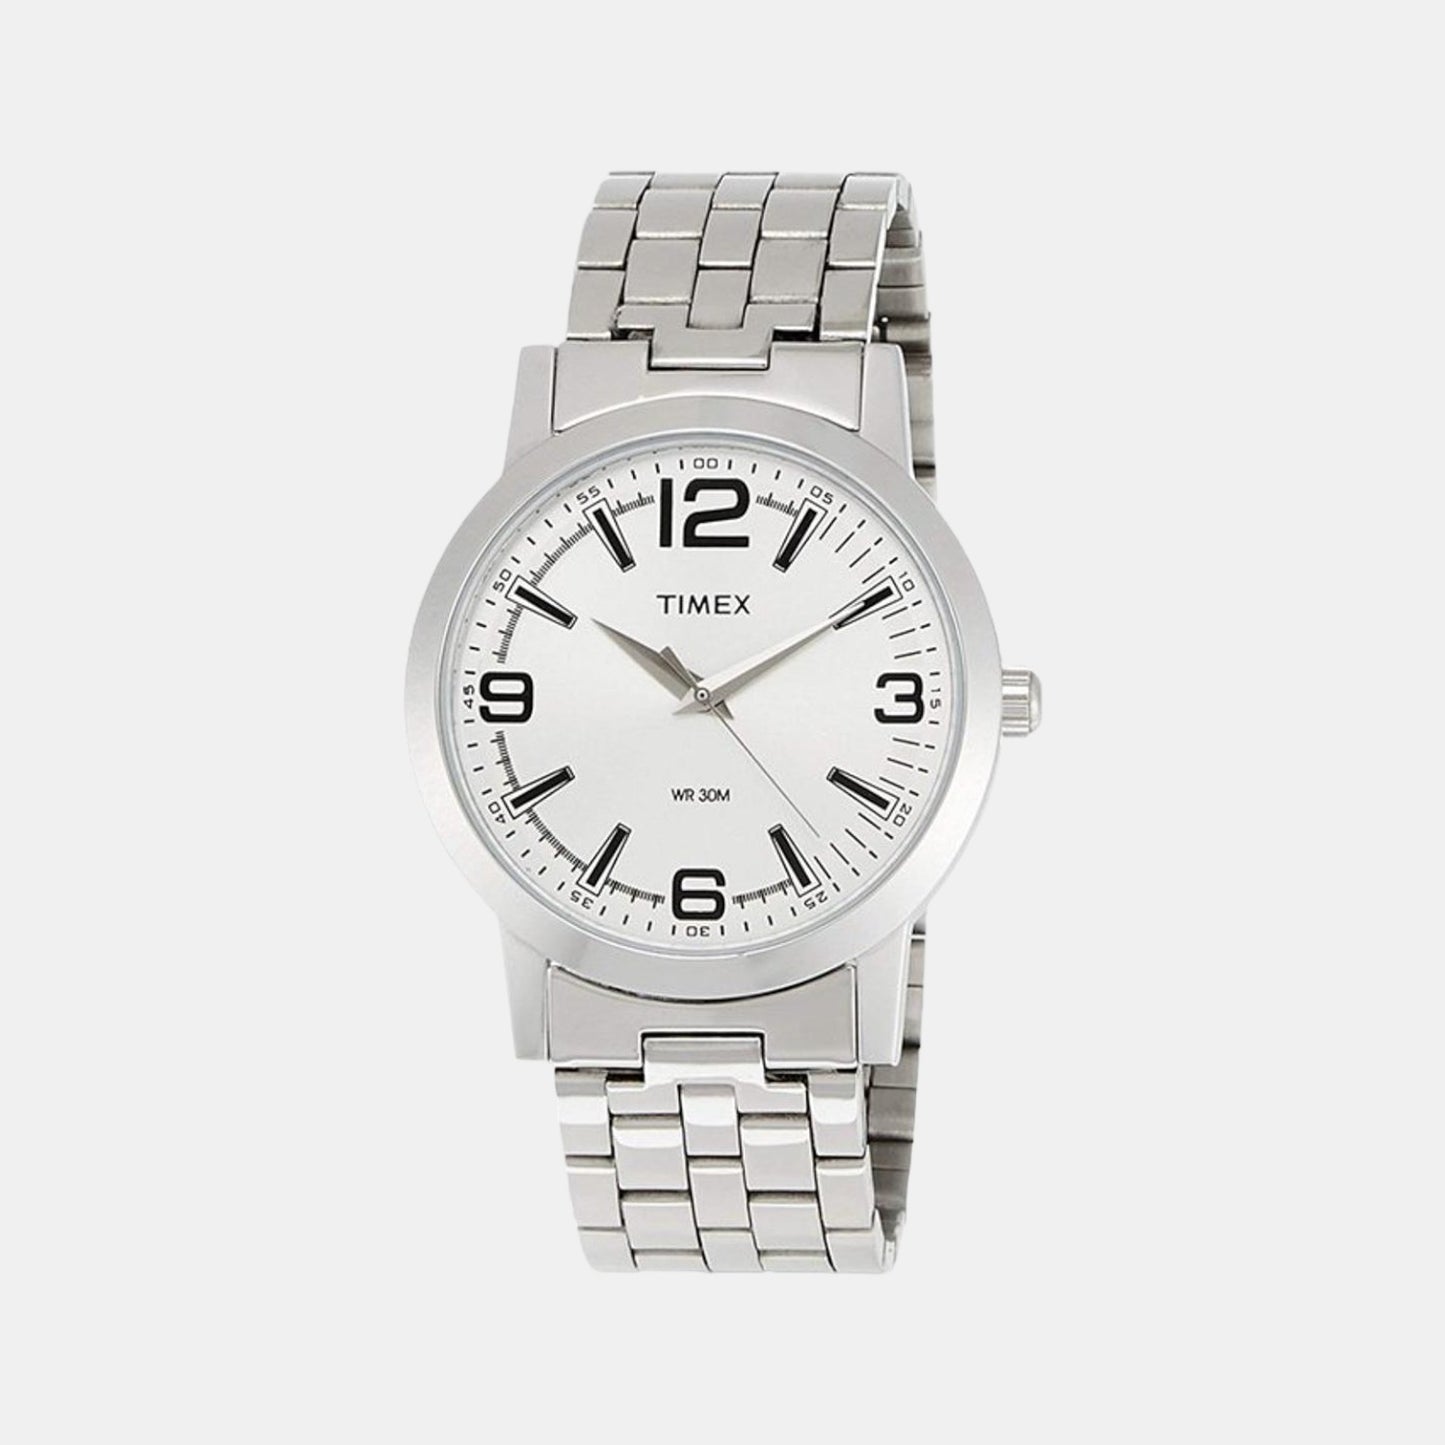 Male Silver Analog Stainless Steel Watch TI000T11200